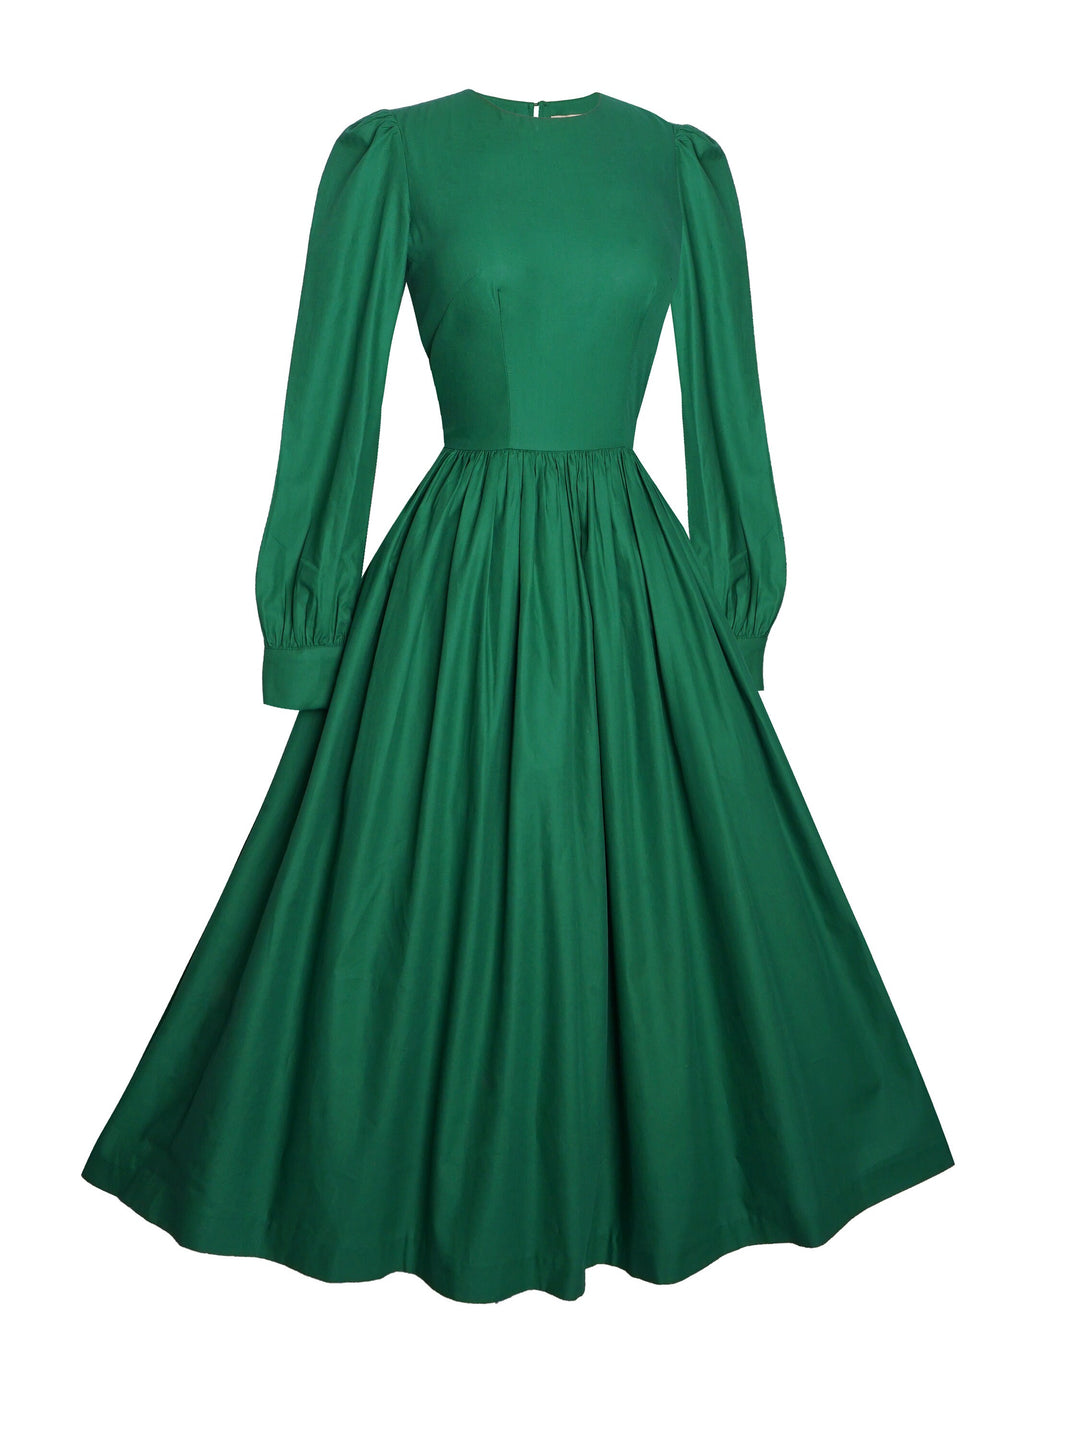 RTS - Size S - Agnes Dress in Pine Green Cotton